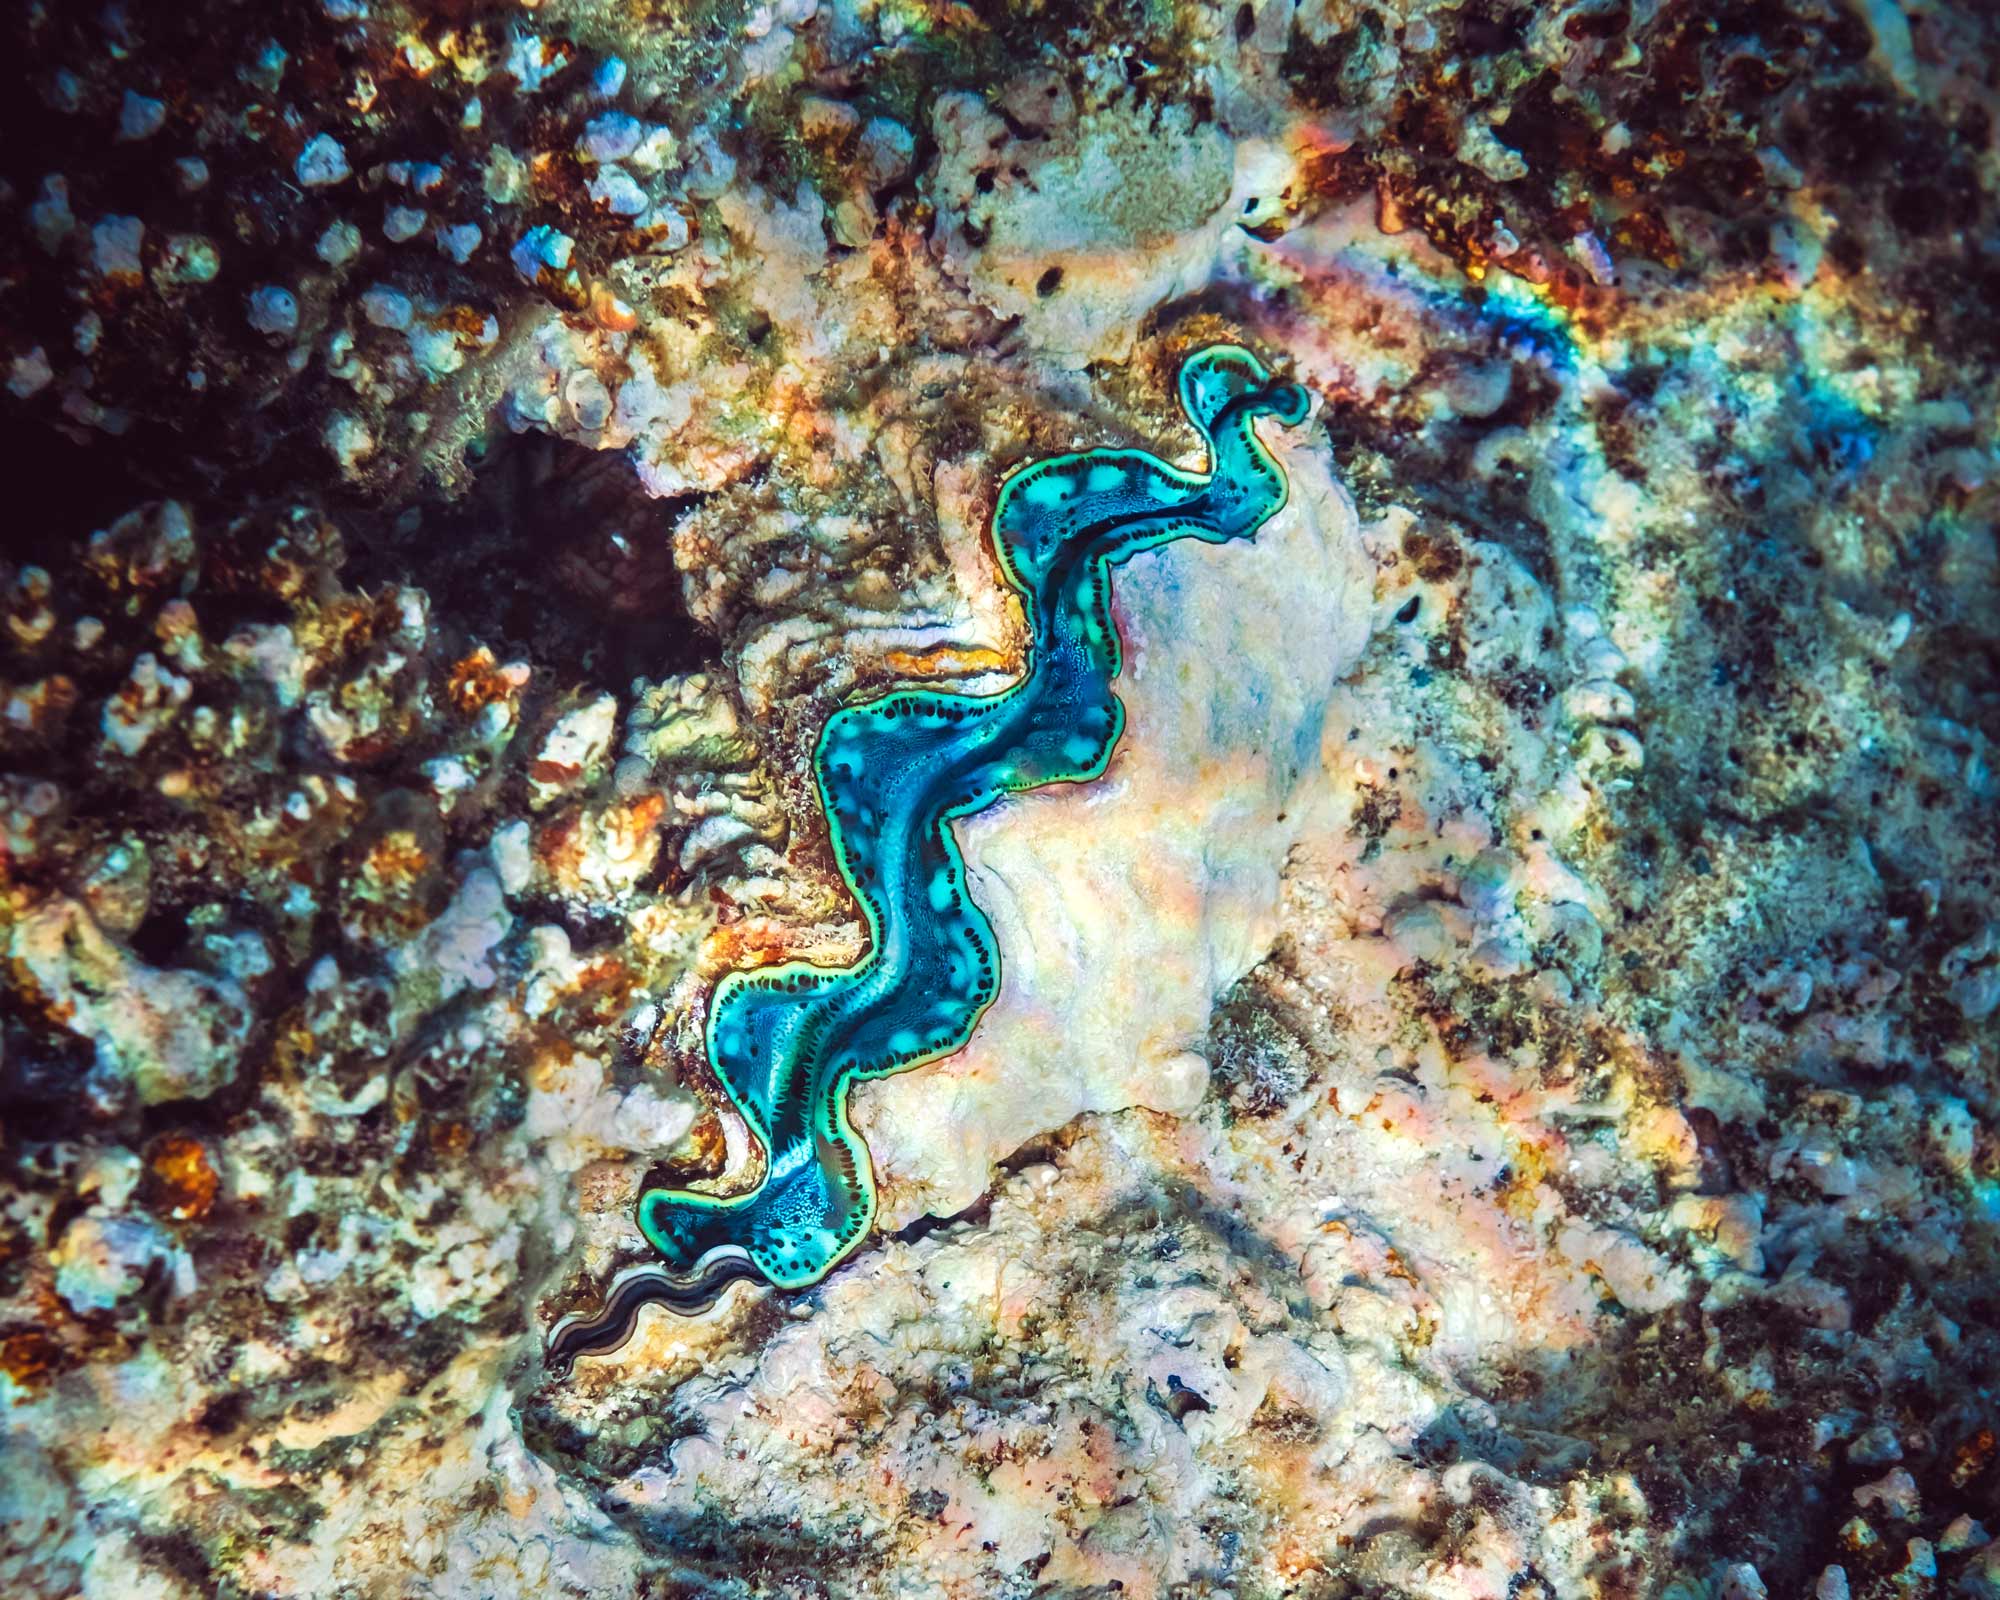 fluted-giant-clam-in-the-tropical-coral-reef-2021-09-02-07-11-55-utc